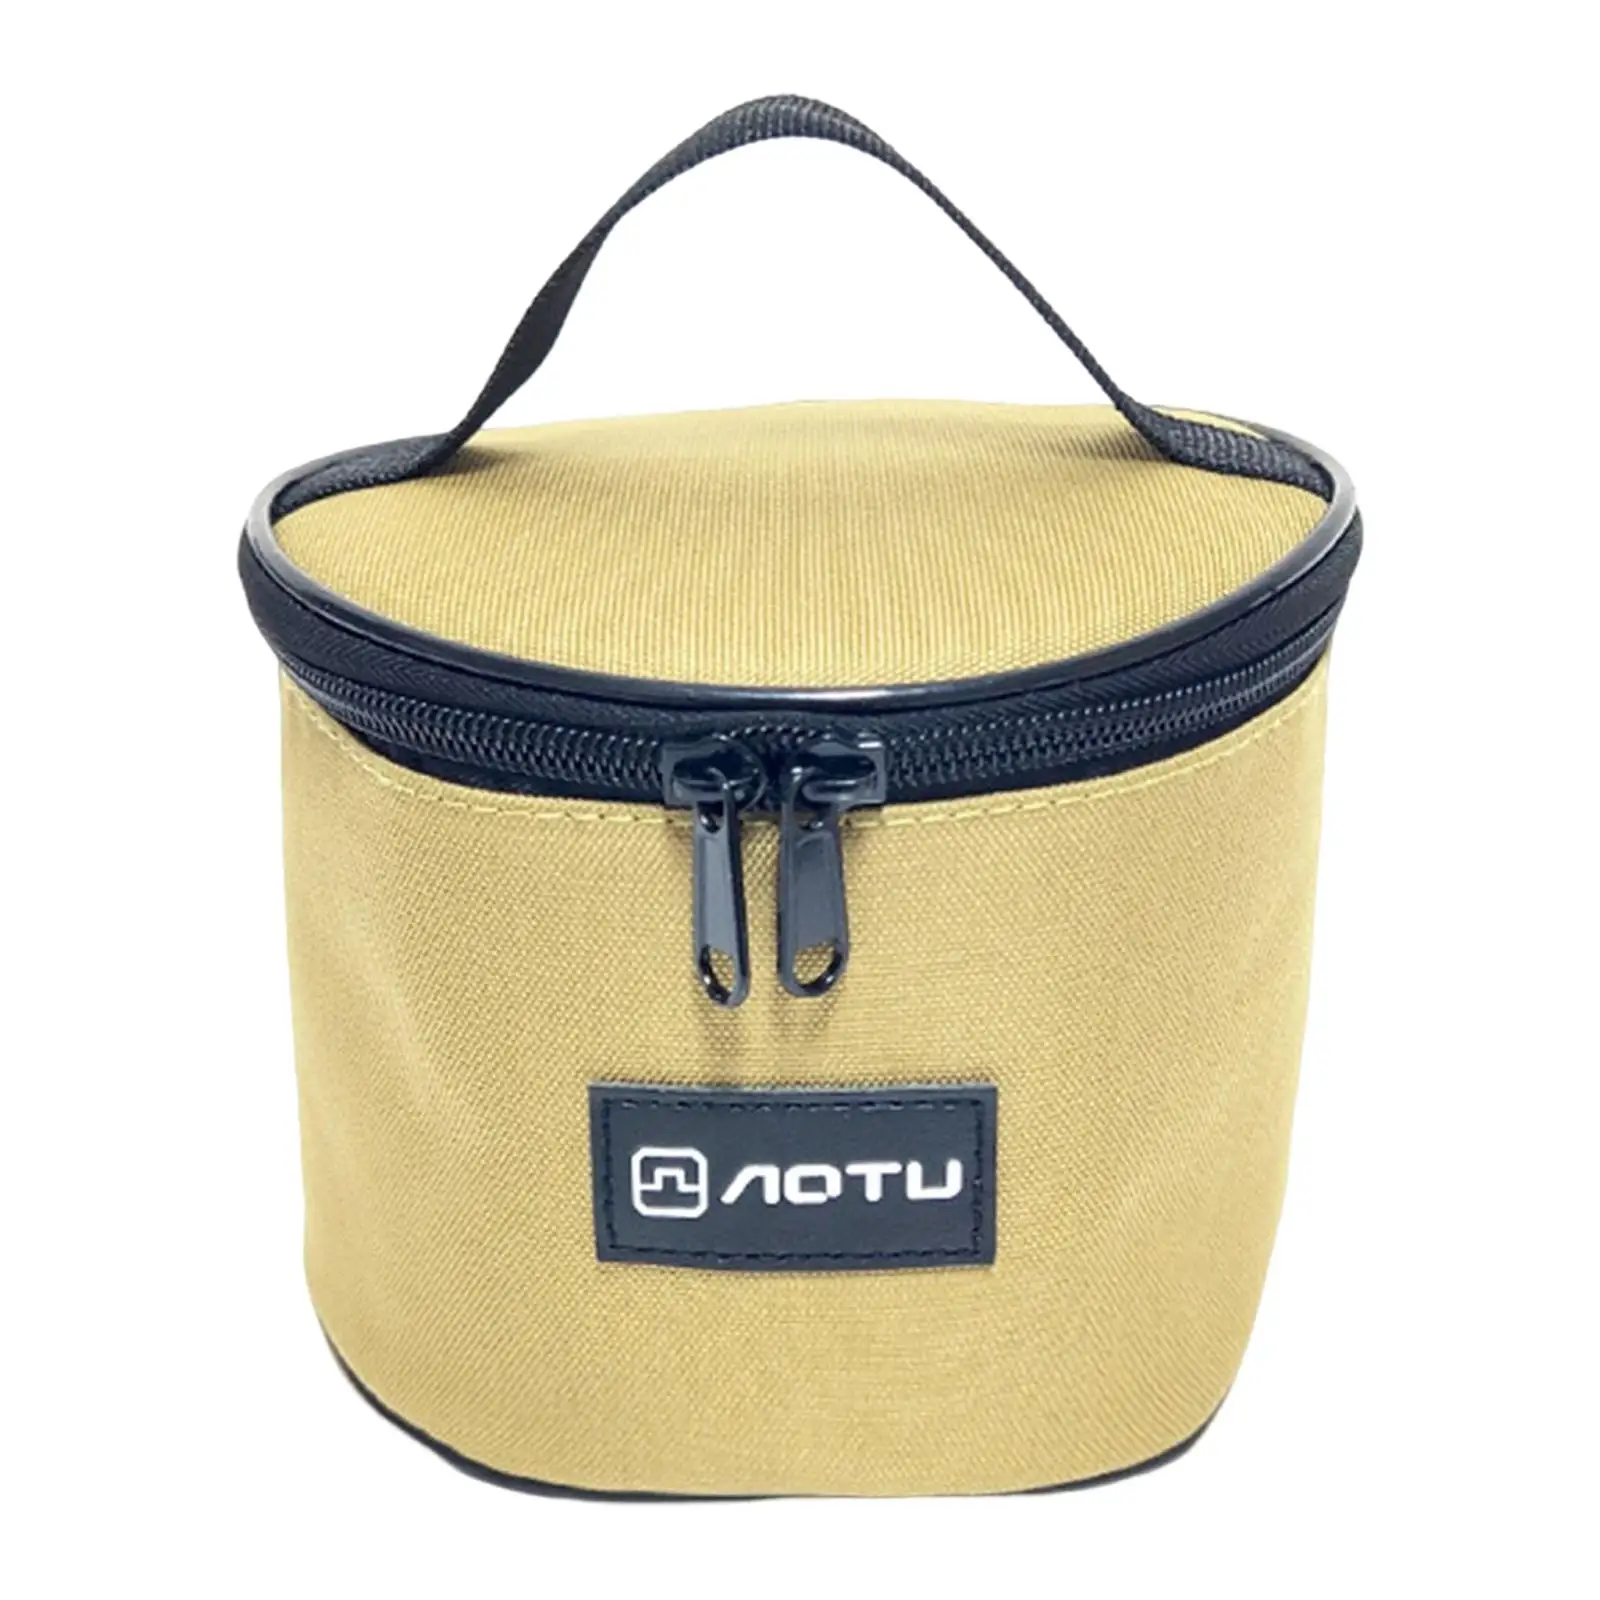 Portable Bowl Storage Bag Carry Case Activities with Handle Waterproof Accessories Camping Oxford Pouch for Travel Fishing